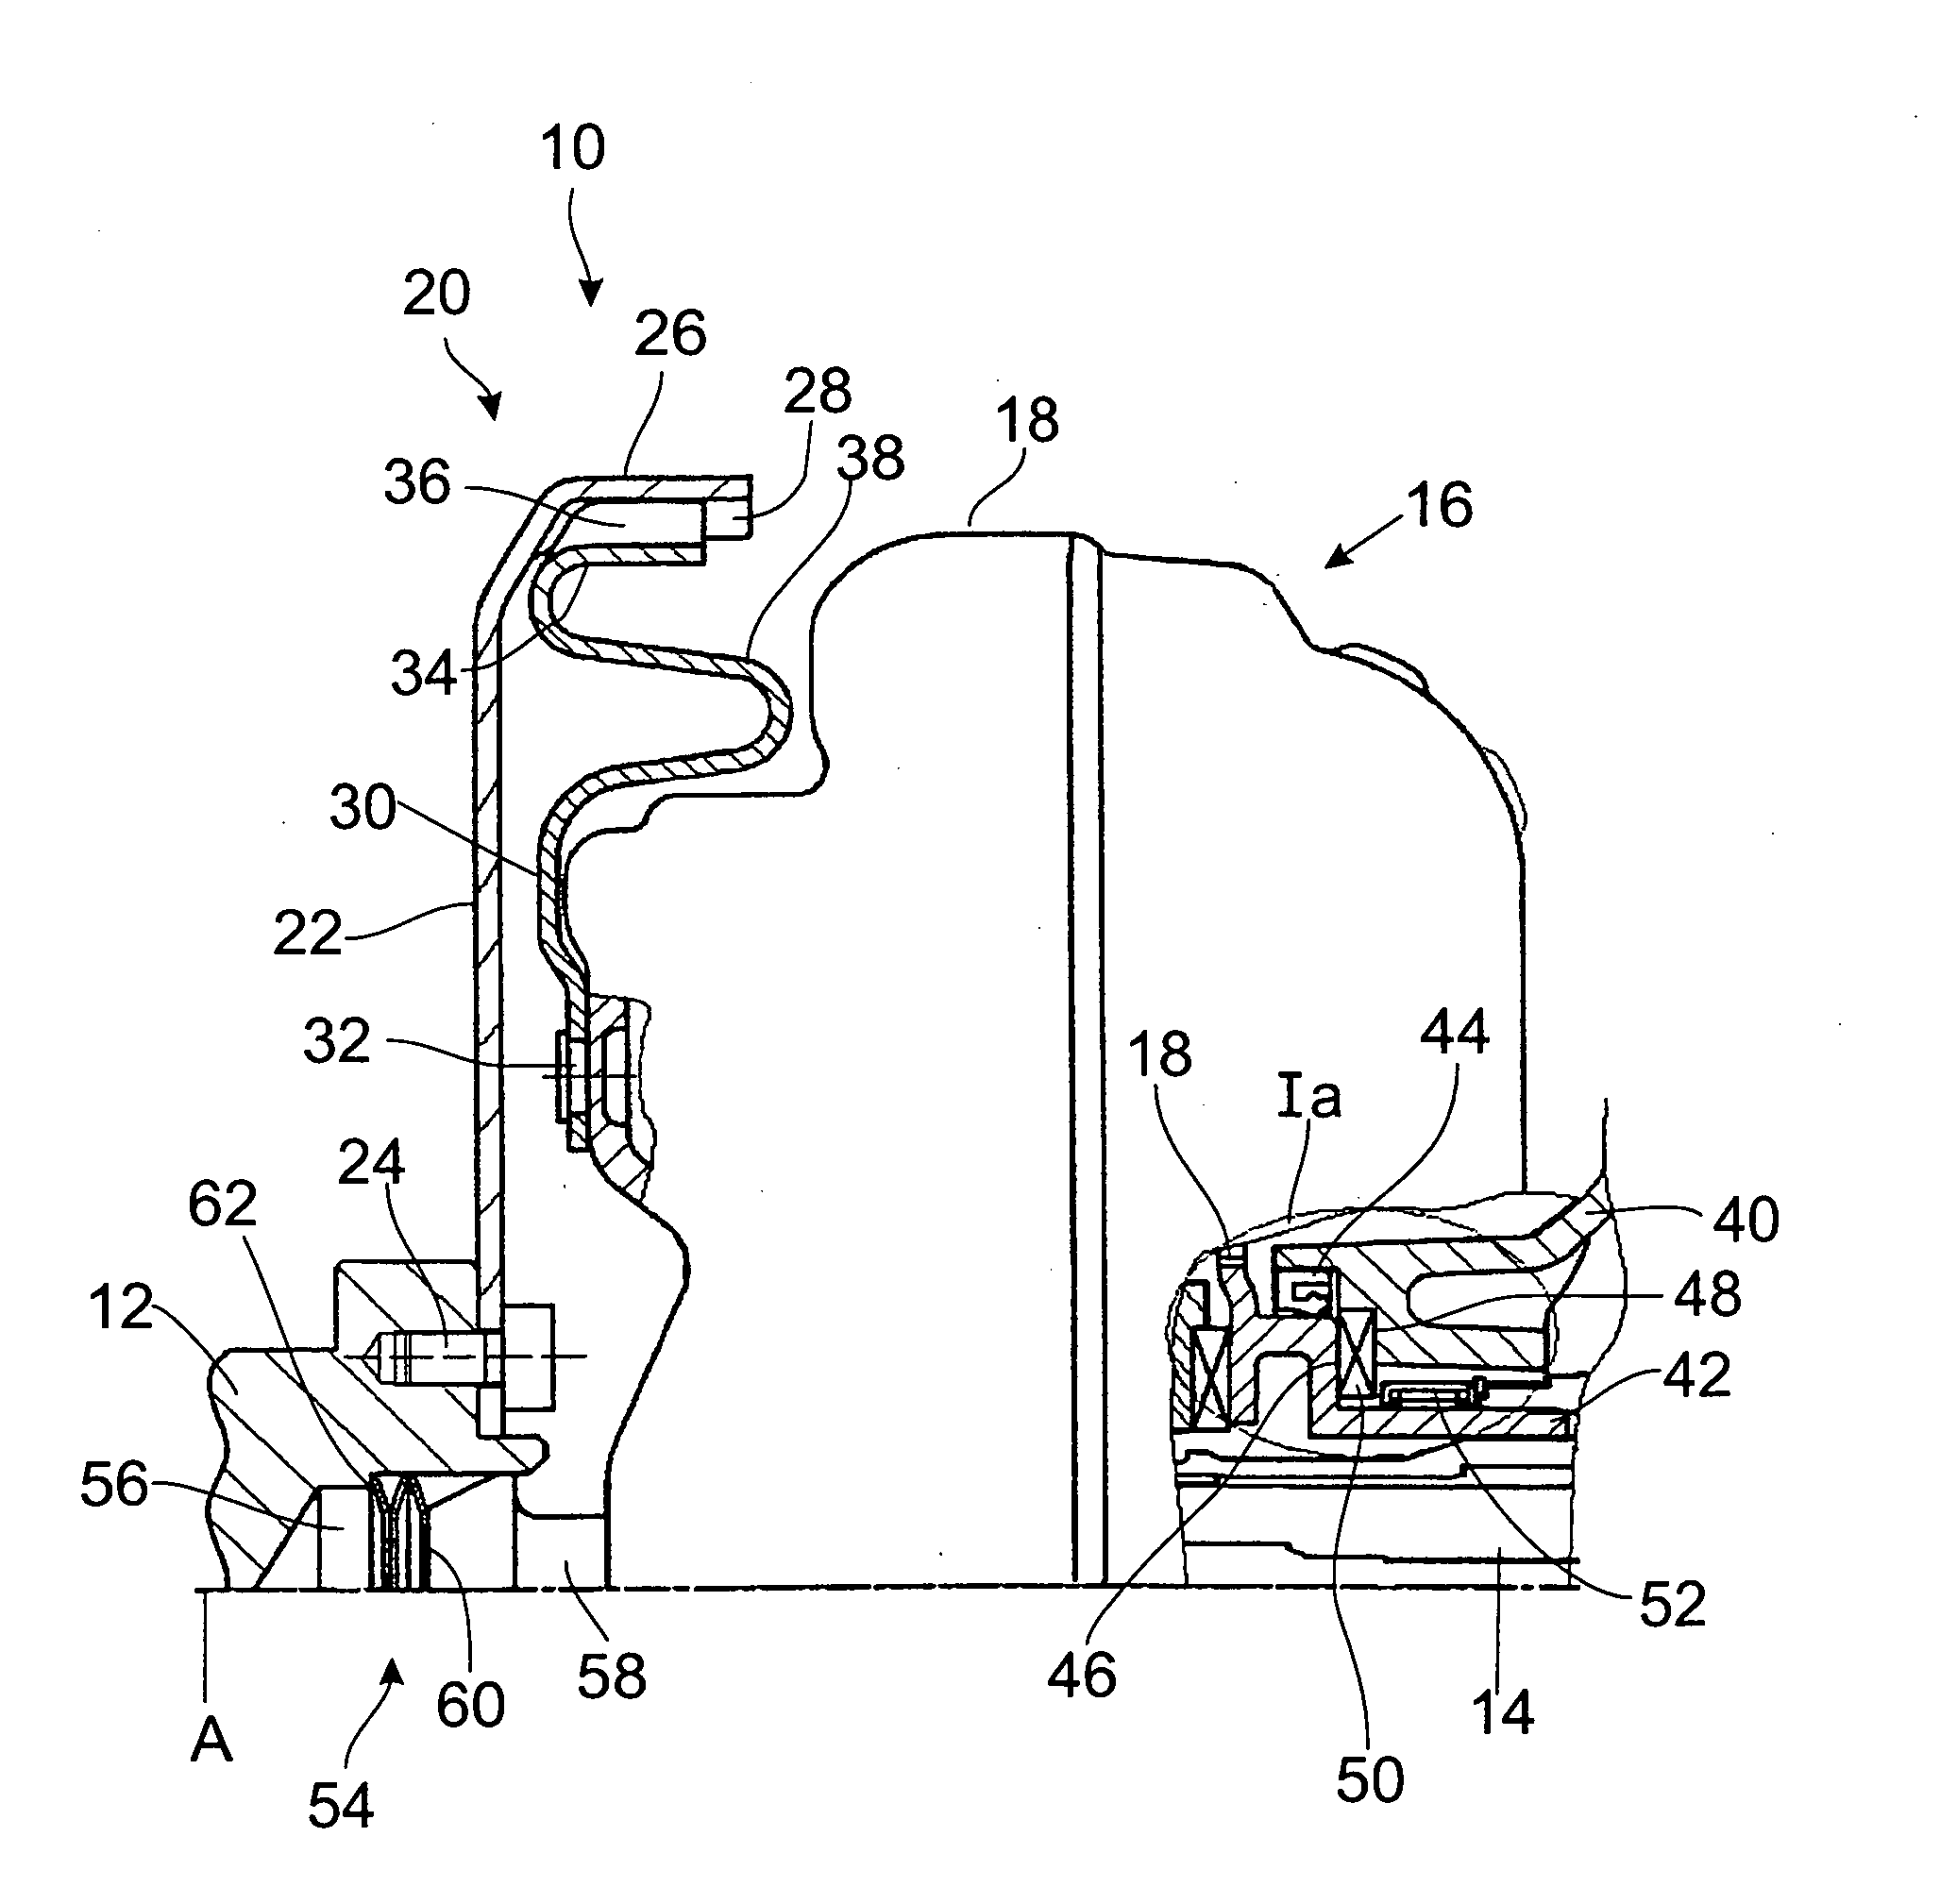 Drive system for a motor vehicle